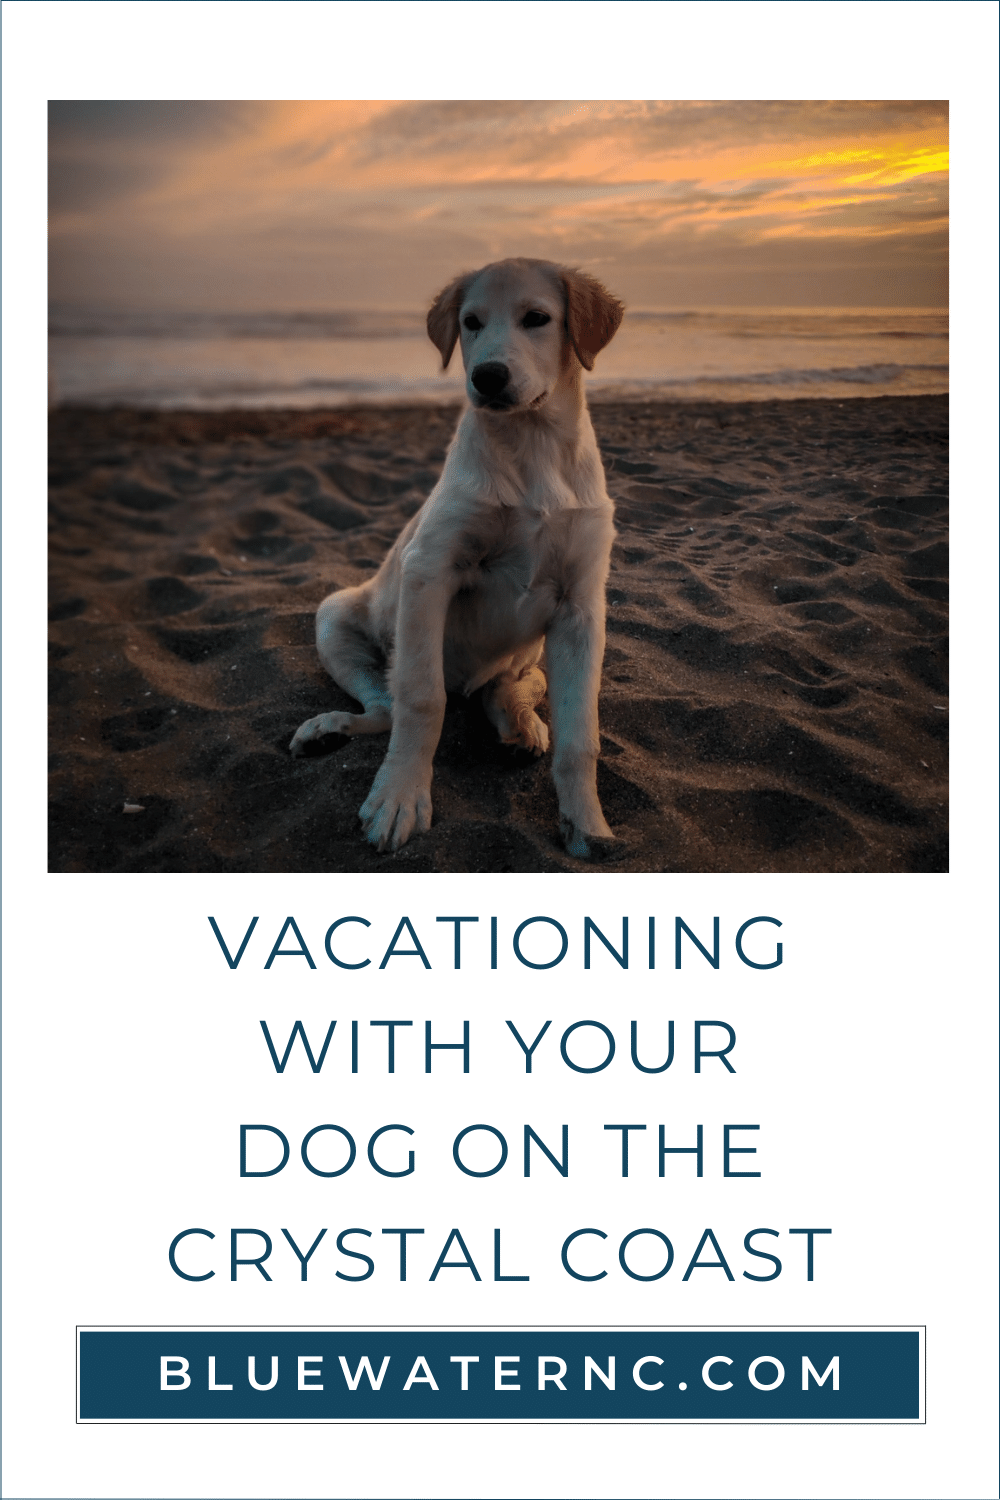 Vacation tips for you and your dog